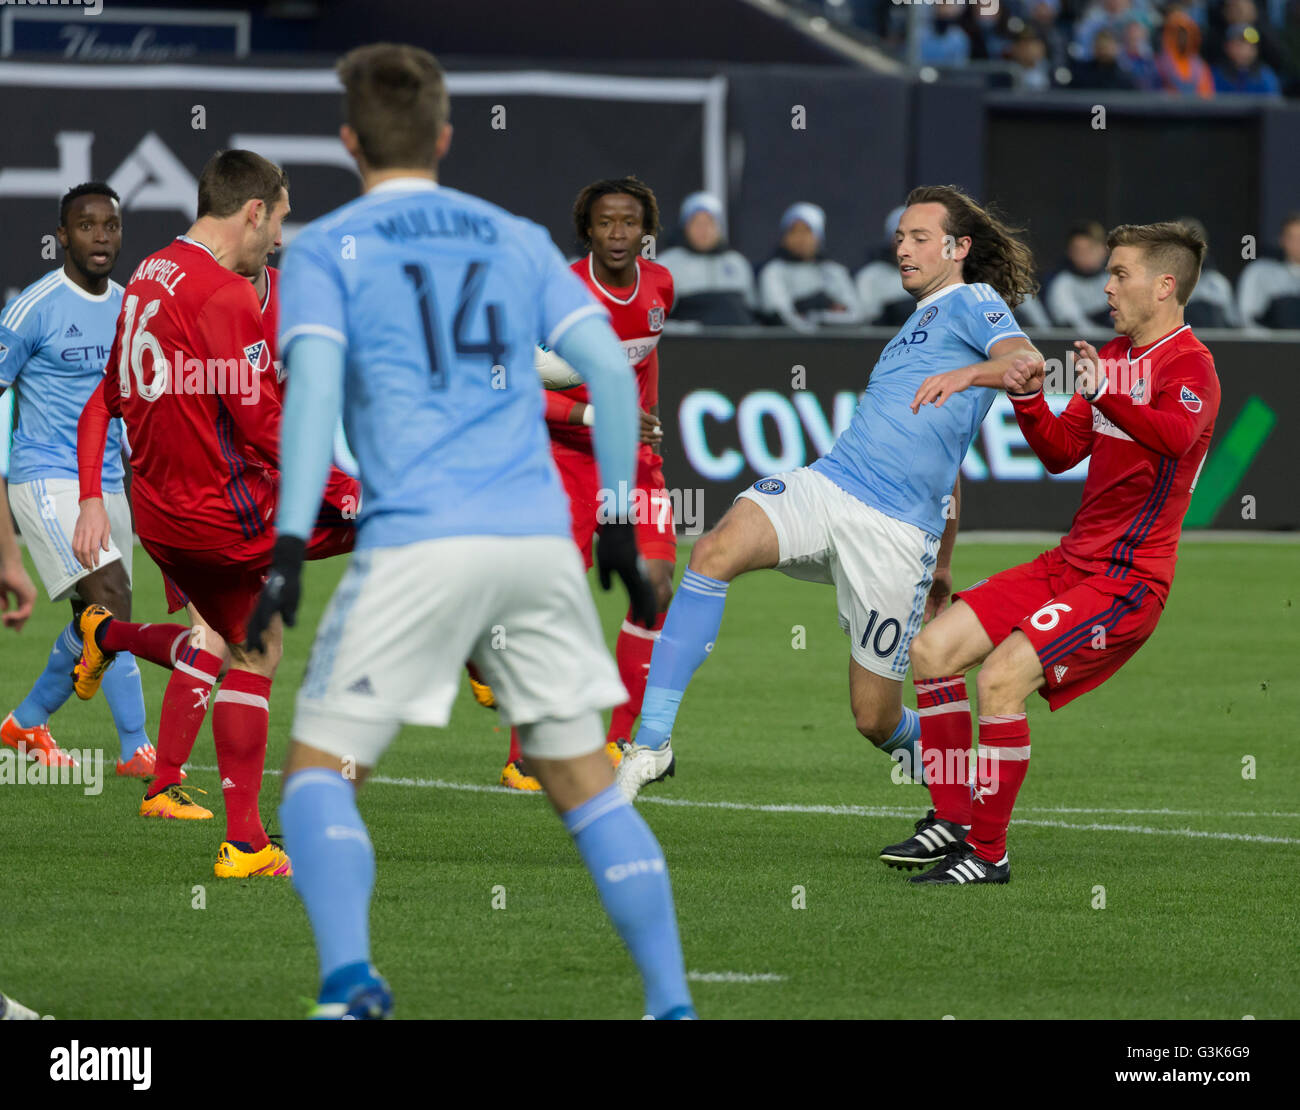 New York, United States. 10th Apr, 2016. Mix Diskerud (10) of NYC FC attacks during MLS soccer game against Chicago Fire at Yankee stadium, game ended in tie with no goals © Lev Radin/Pacific Press/Alamy Live News Stock Photo